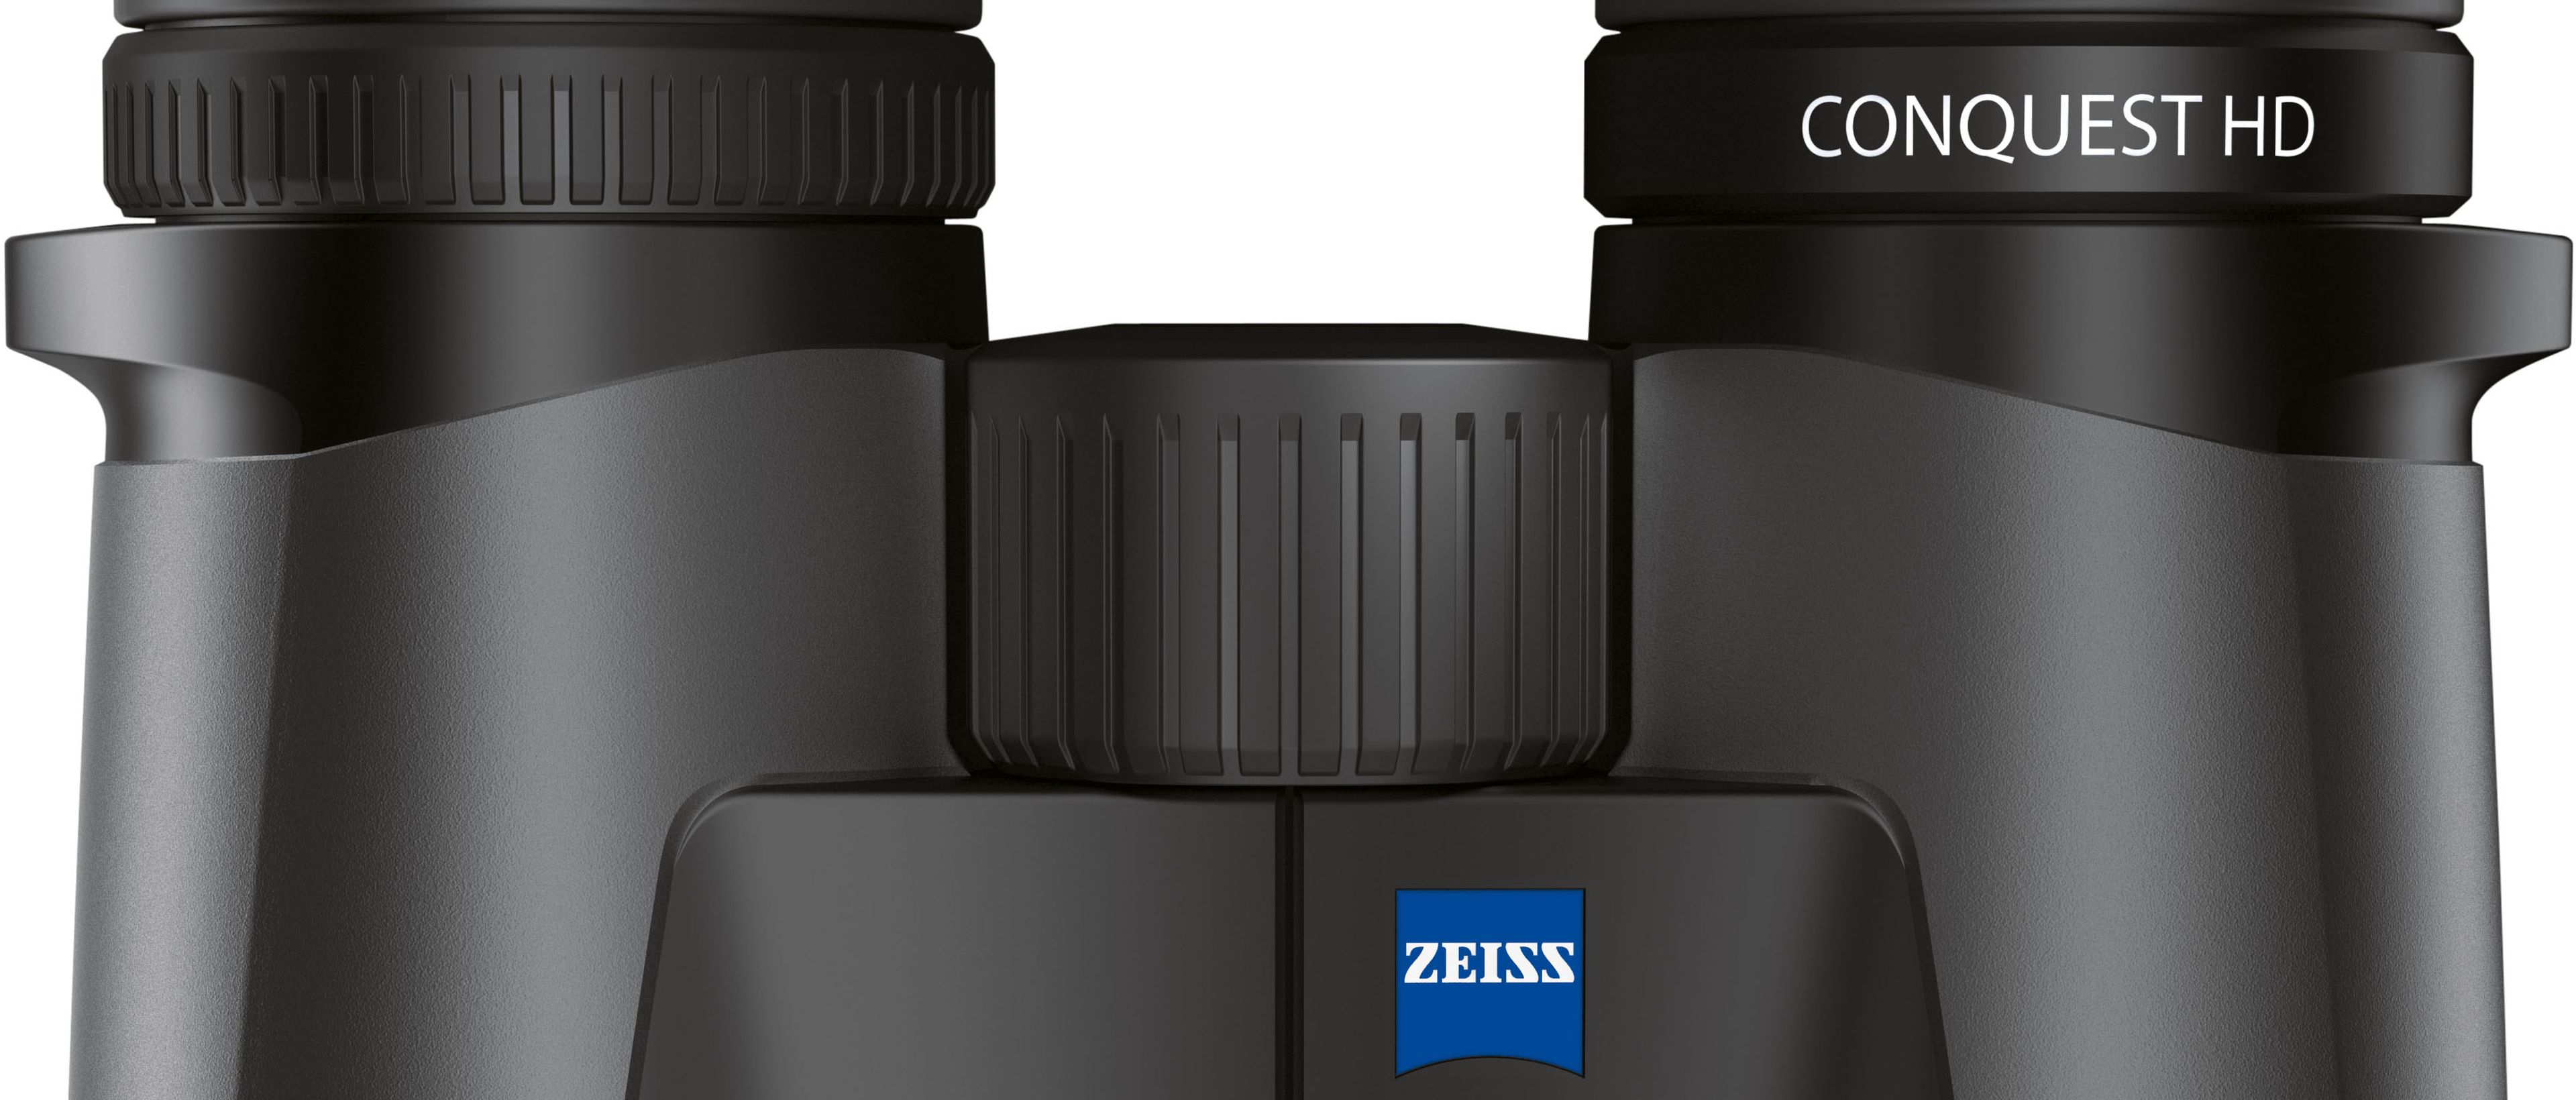 Zeiss – Seeing beyond